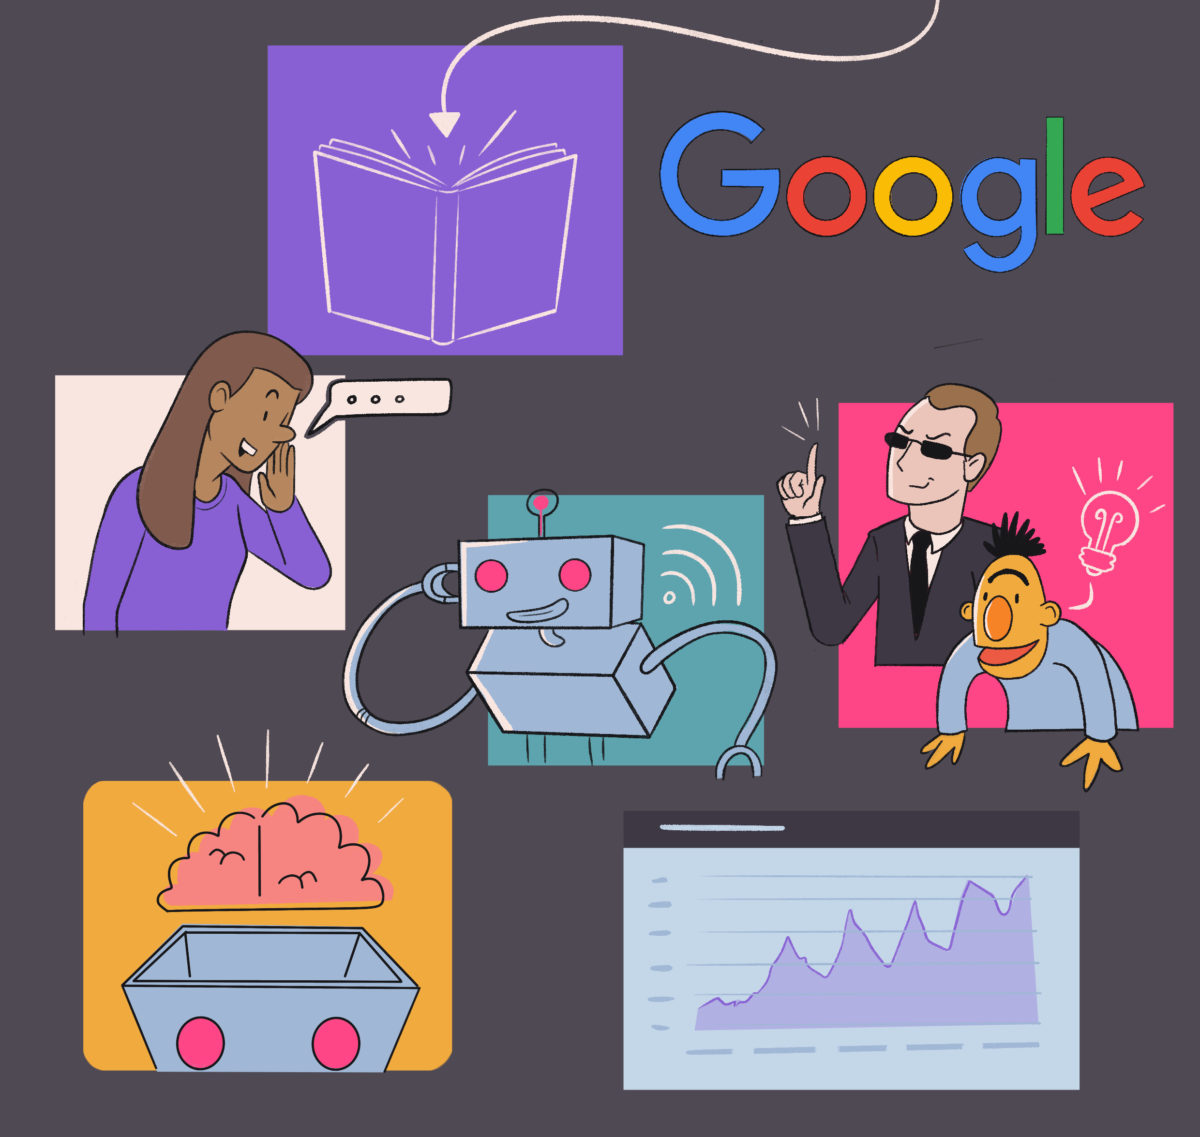 A collage of illustrations depicting various scenarios, including a person thinking, a robot working, google logo, a business presentation, brainstorming, and data analysis.